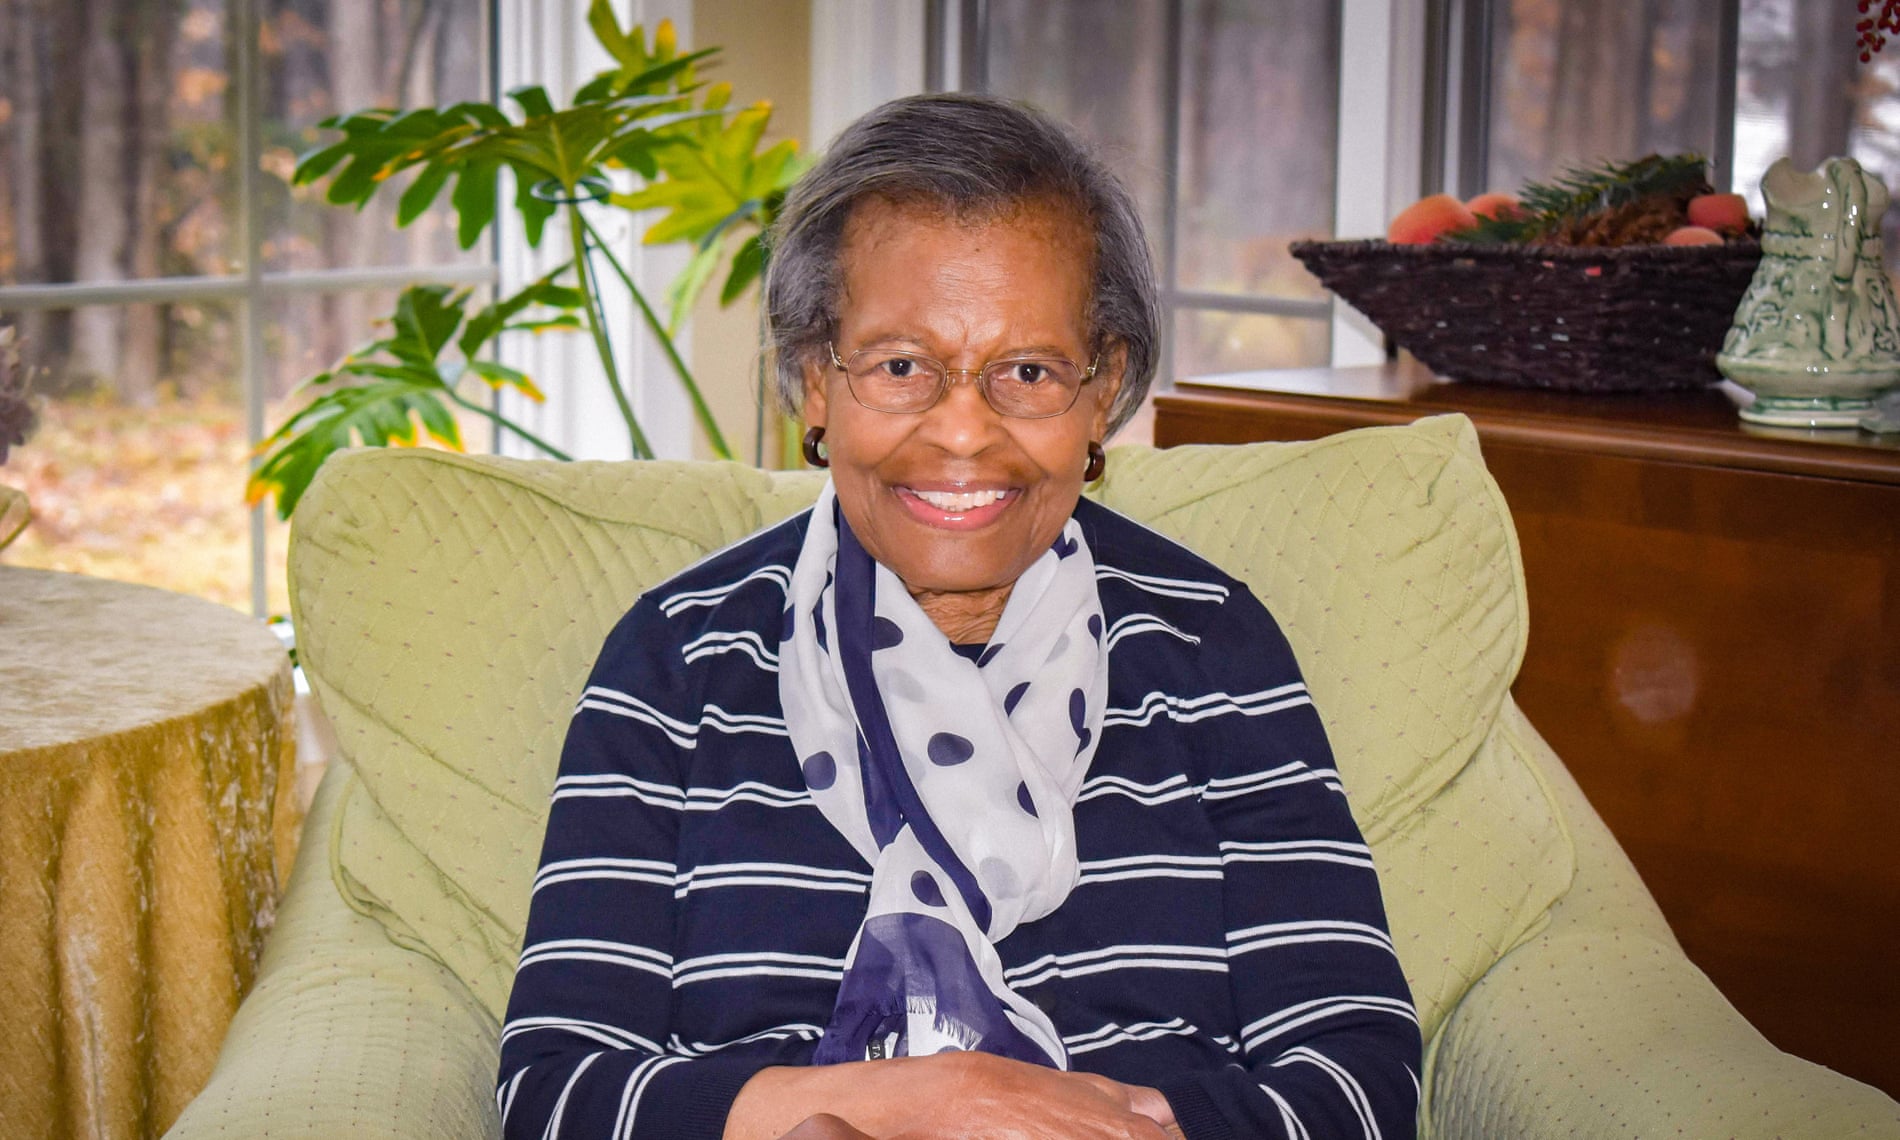 Gladys West, at her home in Virginia.